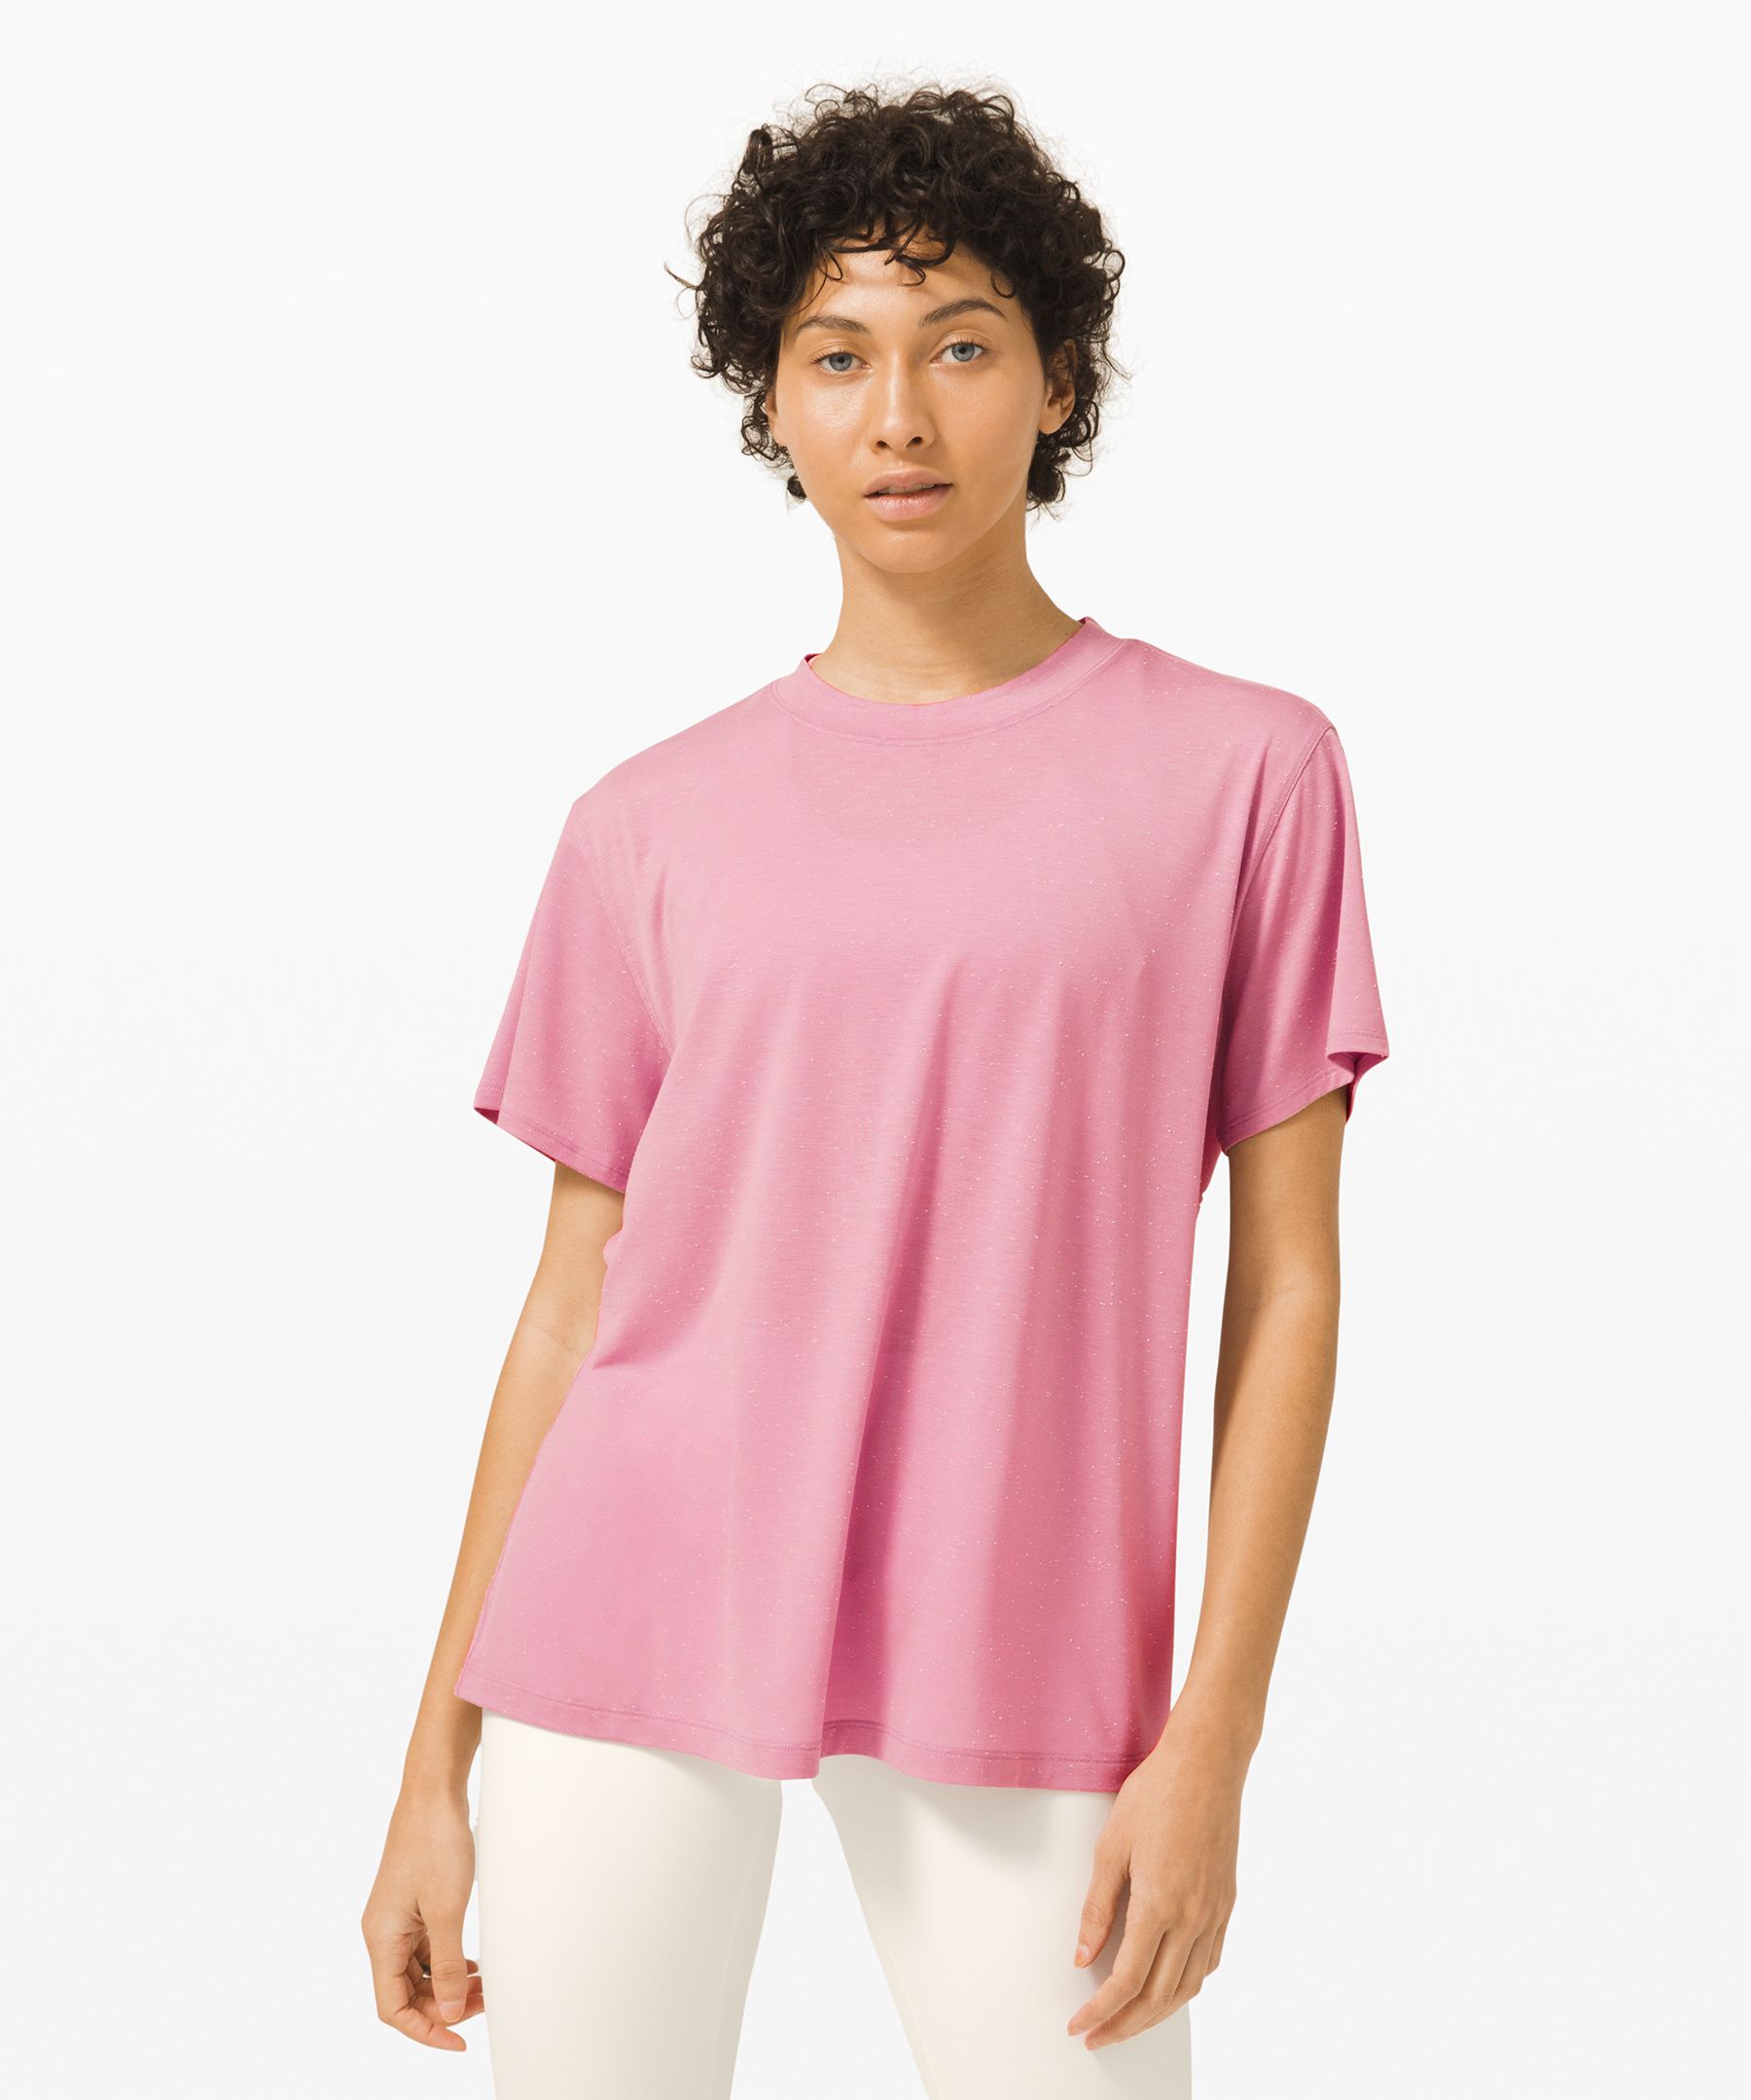 Lululemon All Yours Tee In Pink